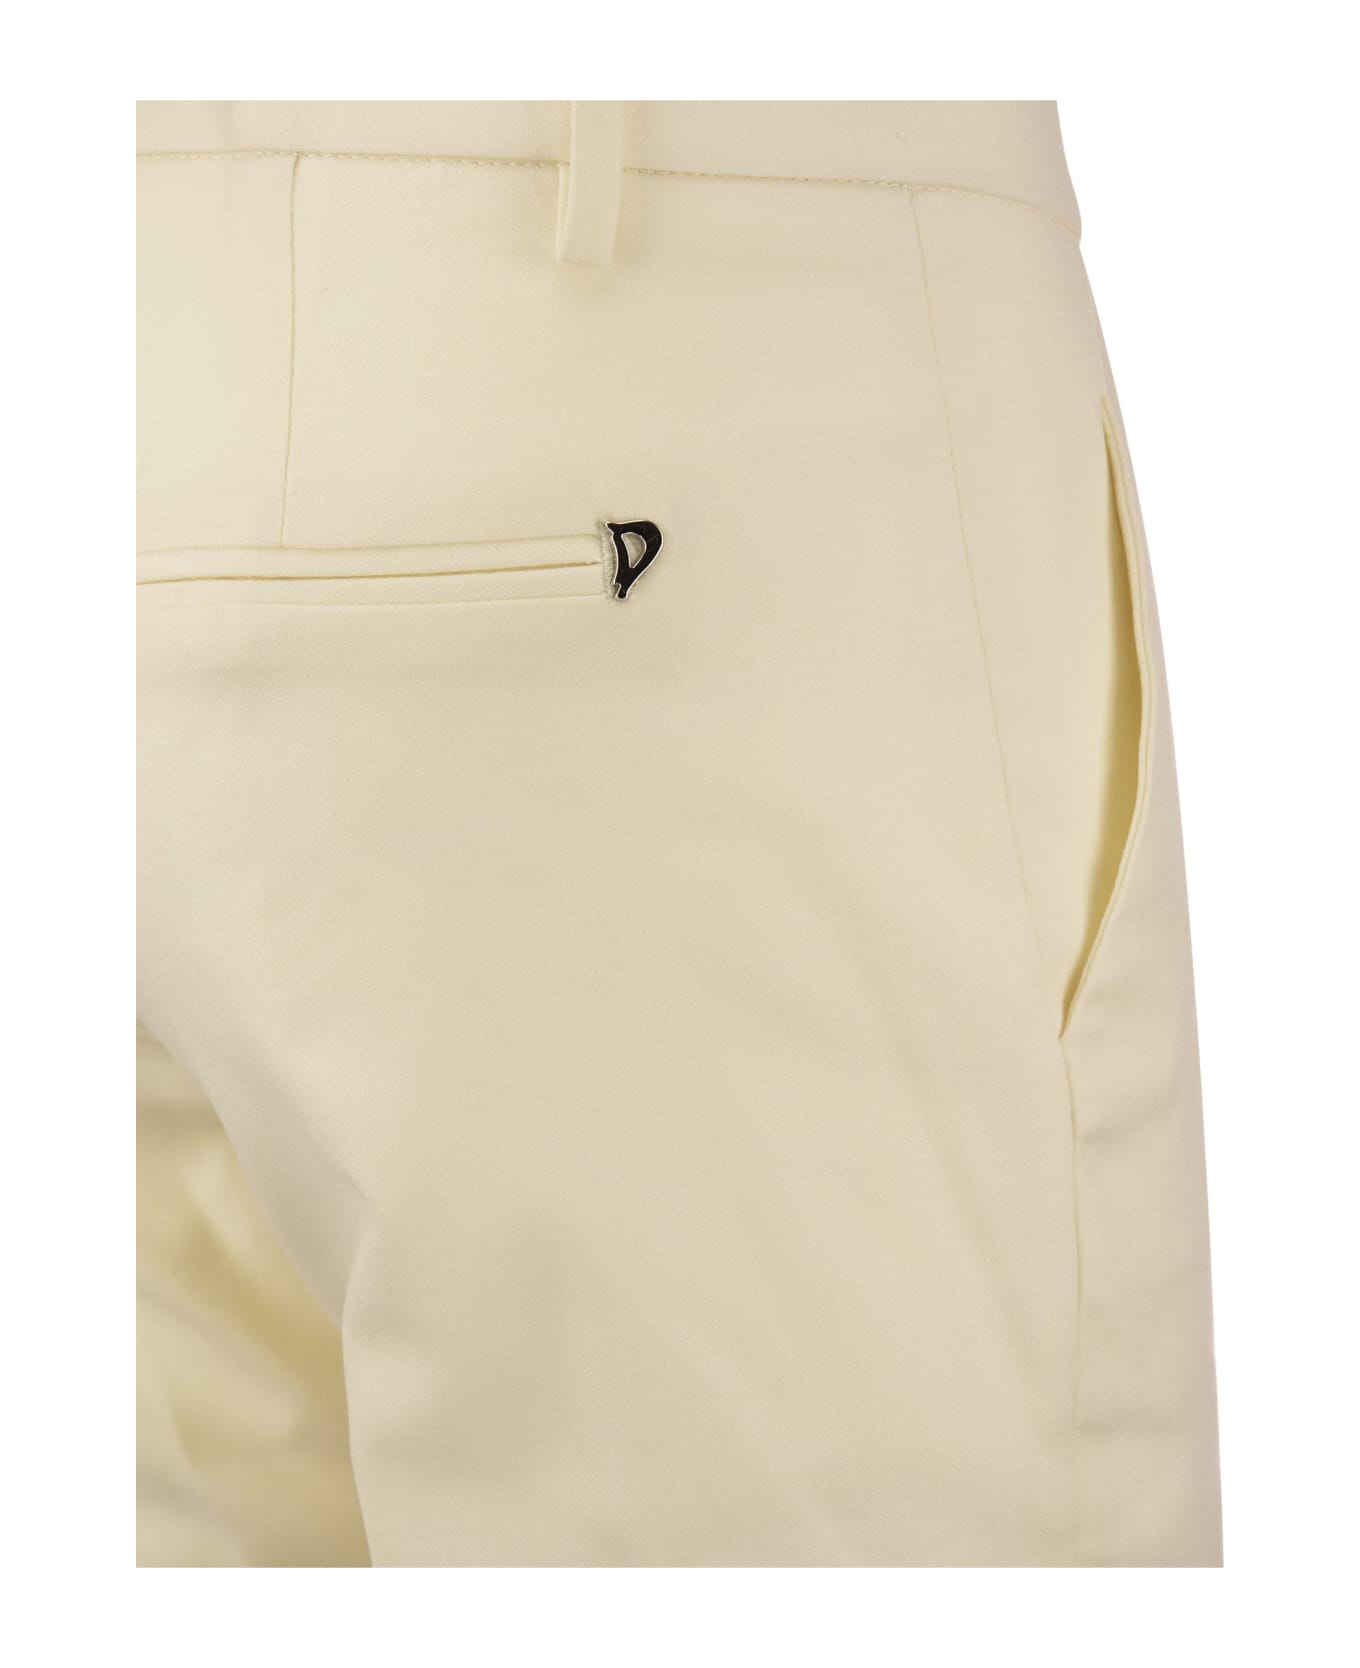 Dondup Perfect - Wool Slim-fit Trousers - Cream ボトムス